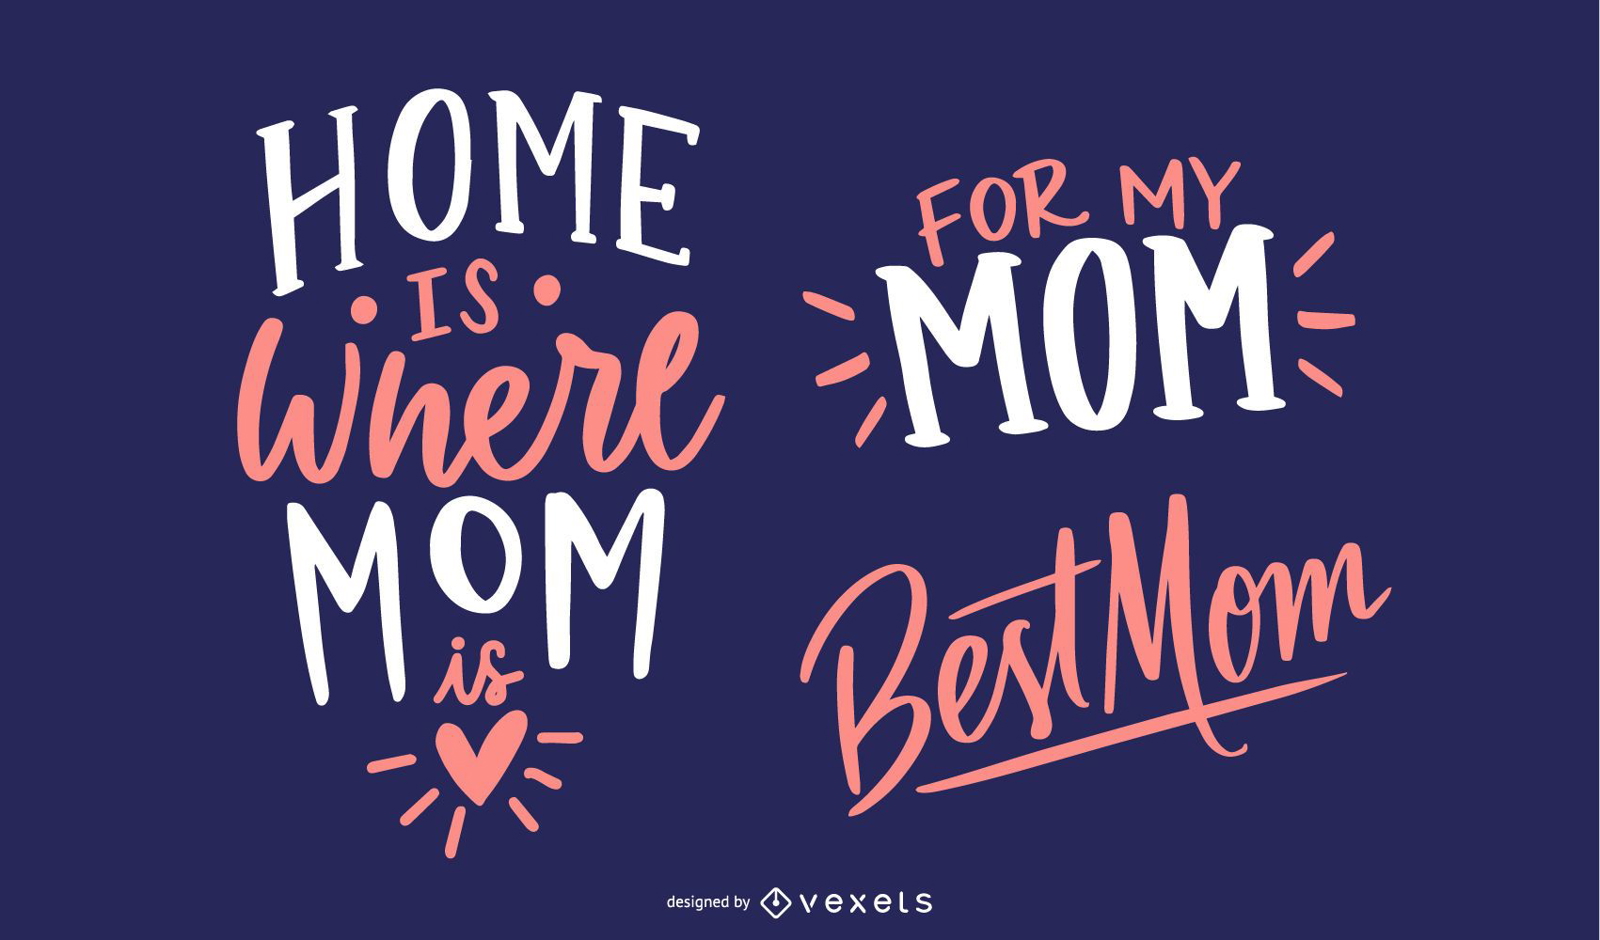 Mother's Day Greeting Design 